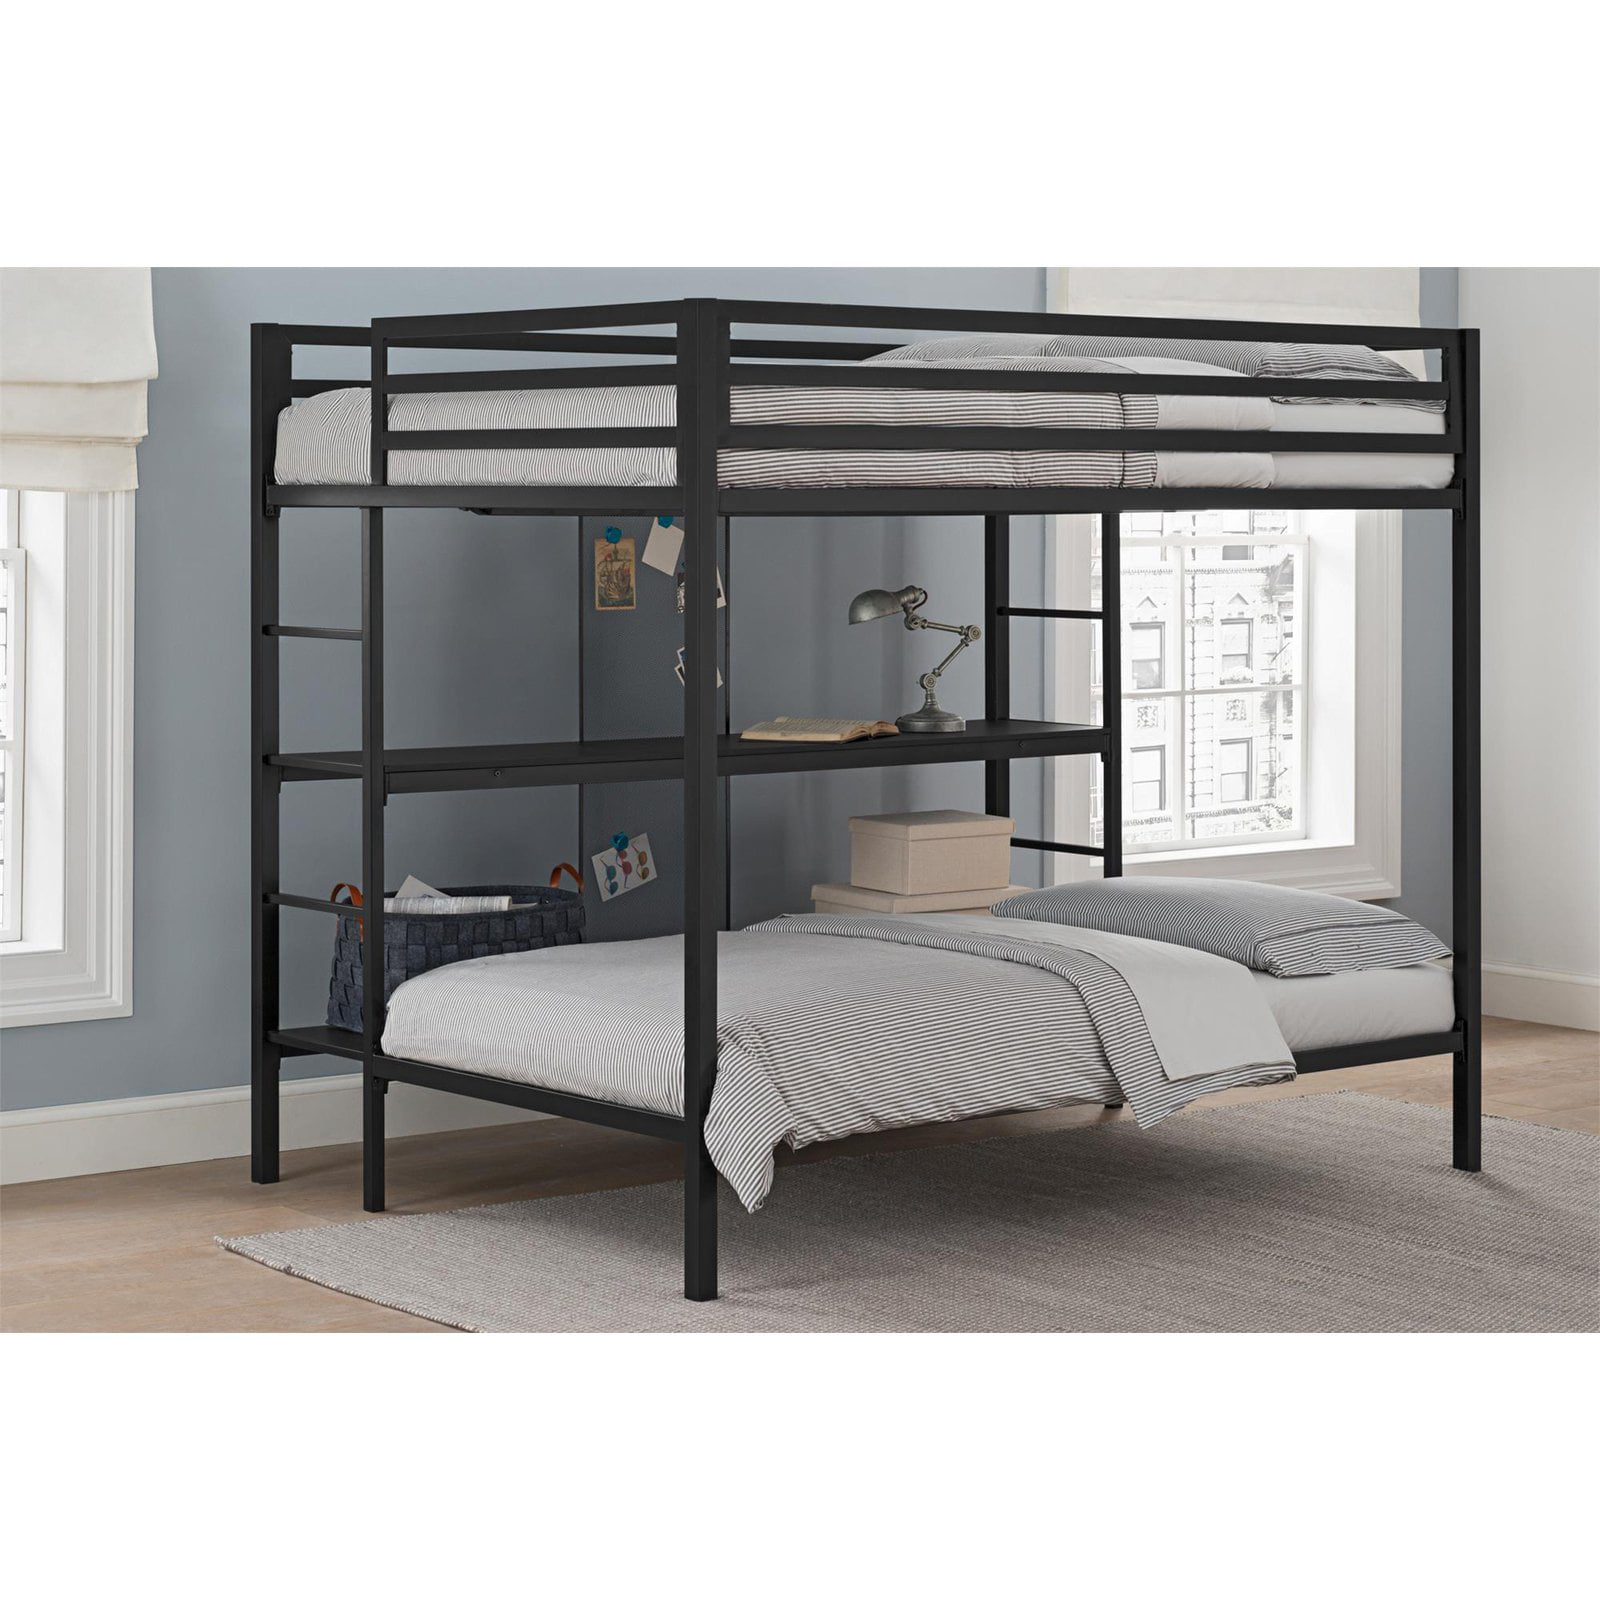 New Ultimate Bunk Beds for Large Space